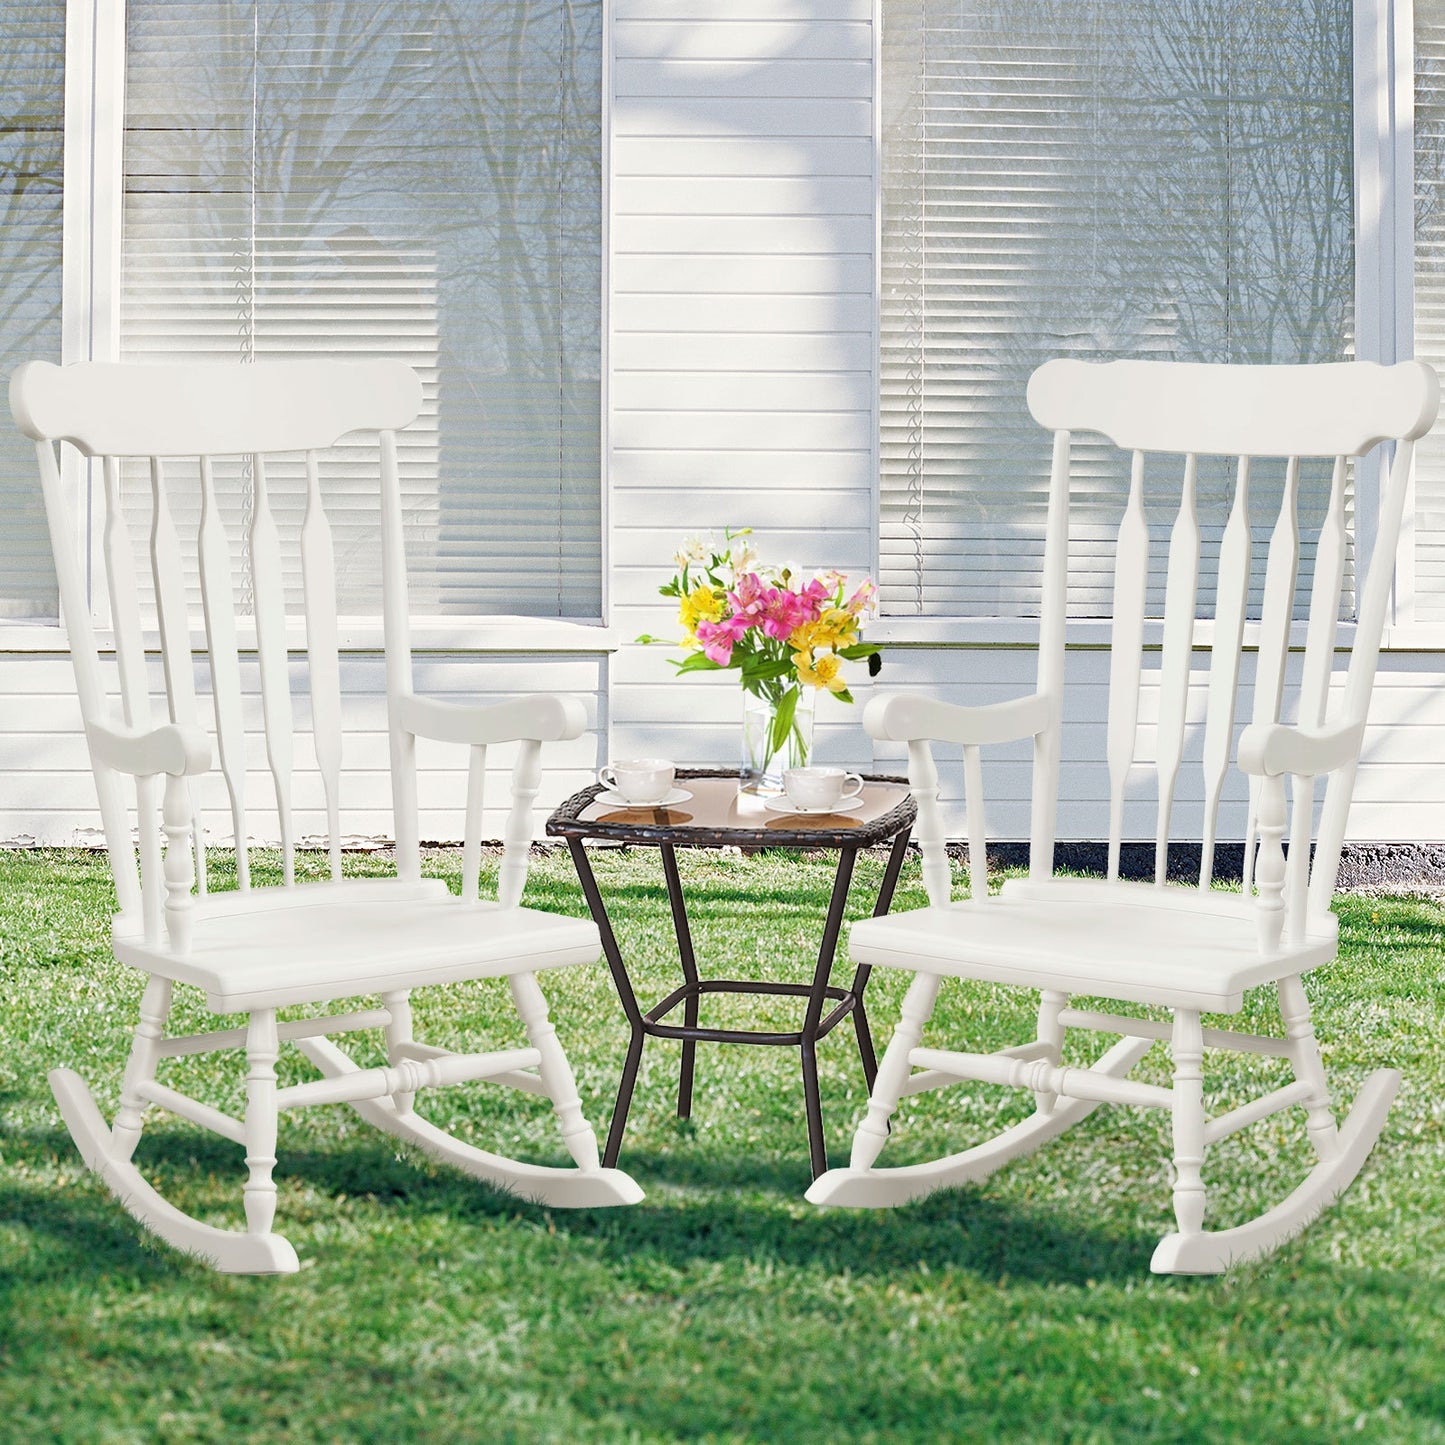 Solid Wood Porch Glossy Finish Rocking Chair-White